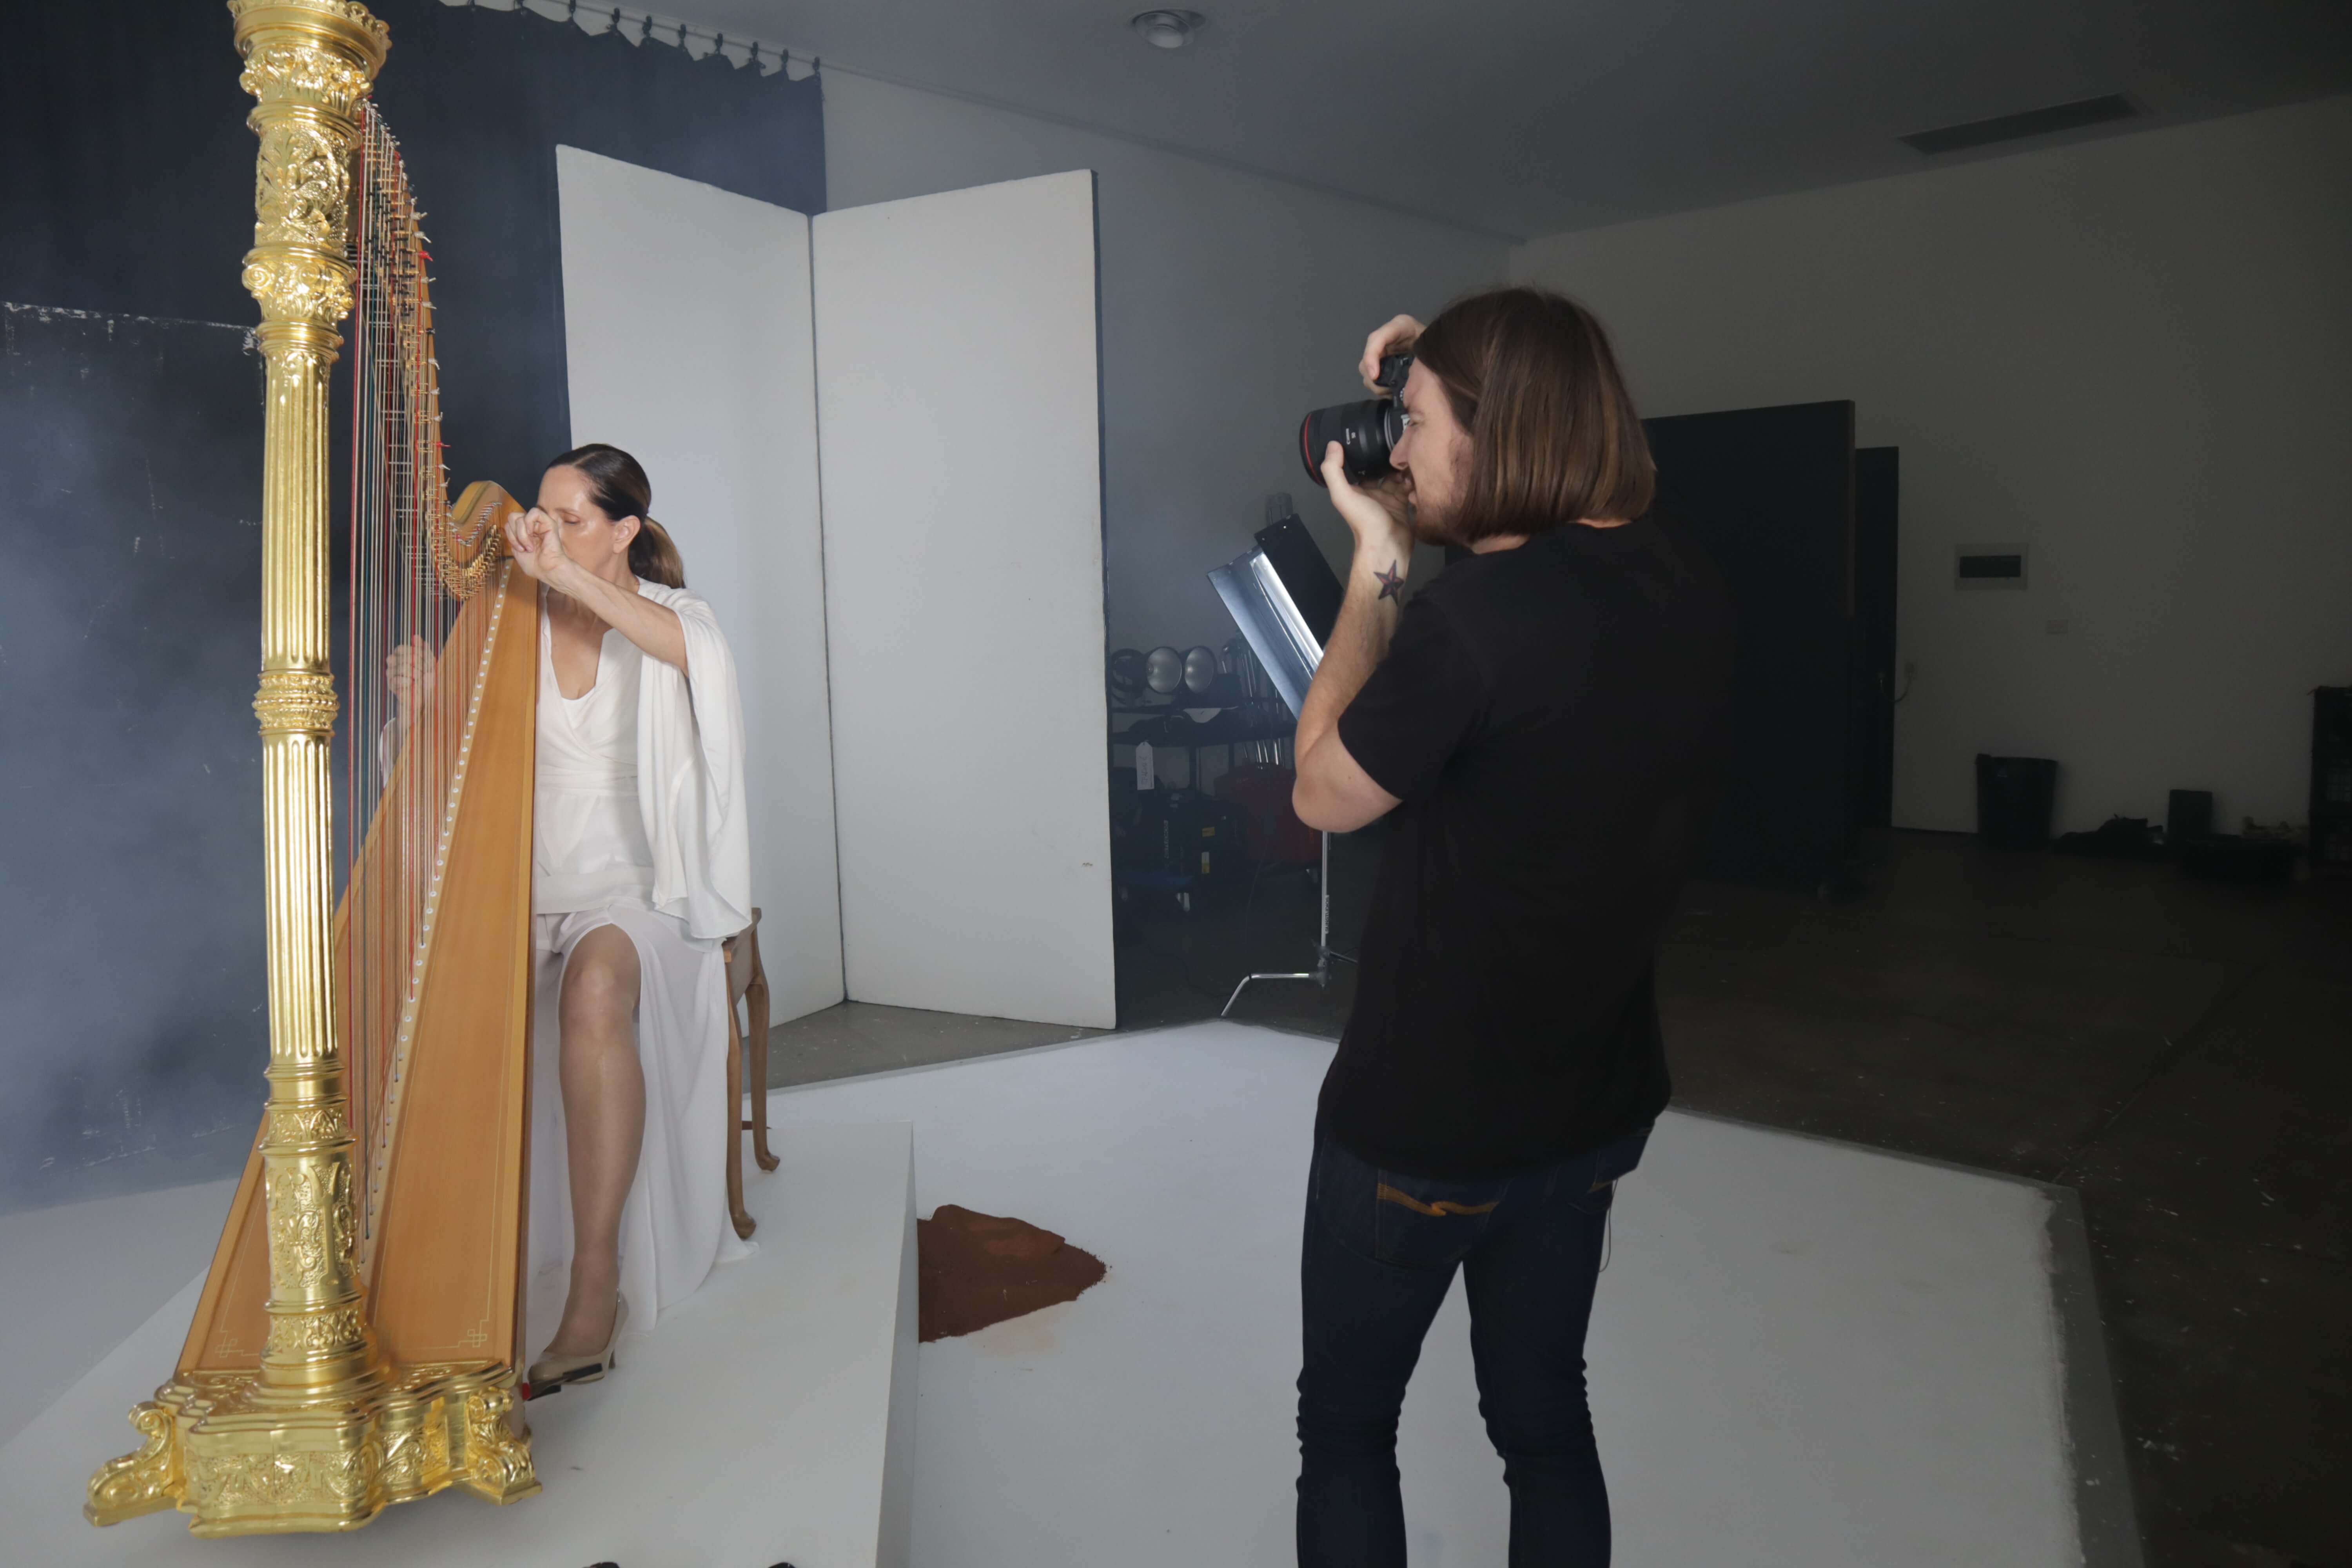 female photographer taking a photo of a woman playing a harp